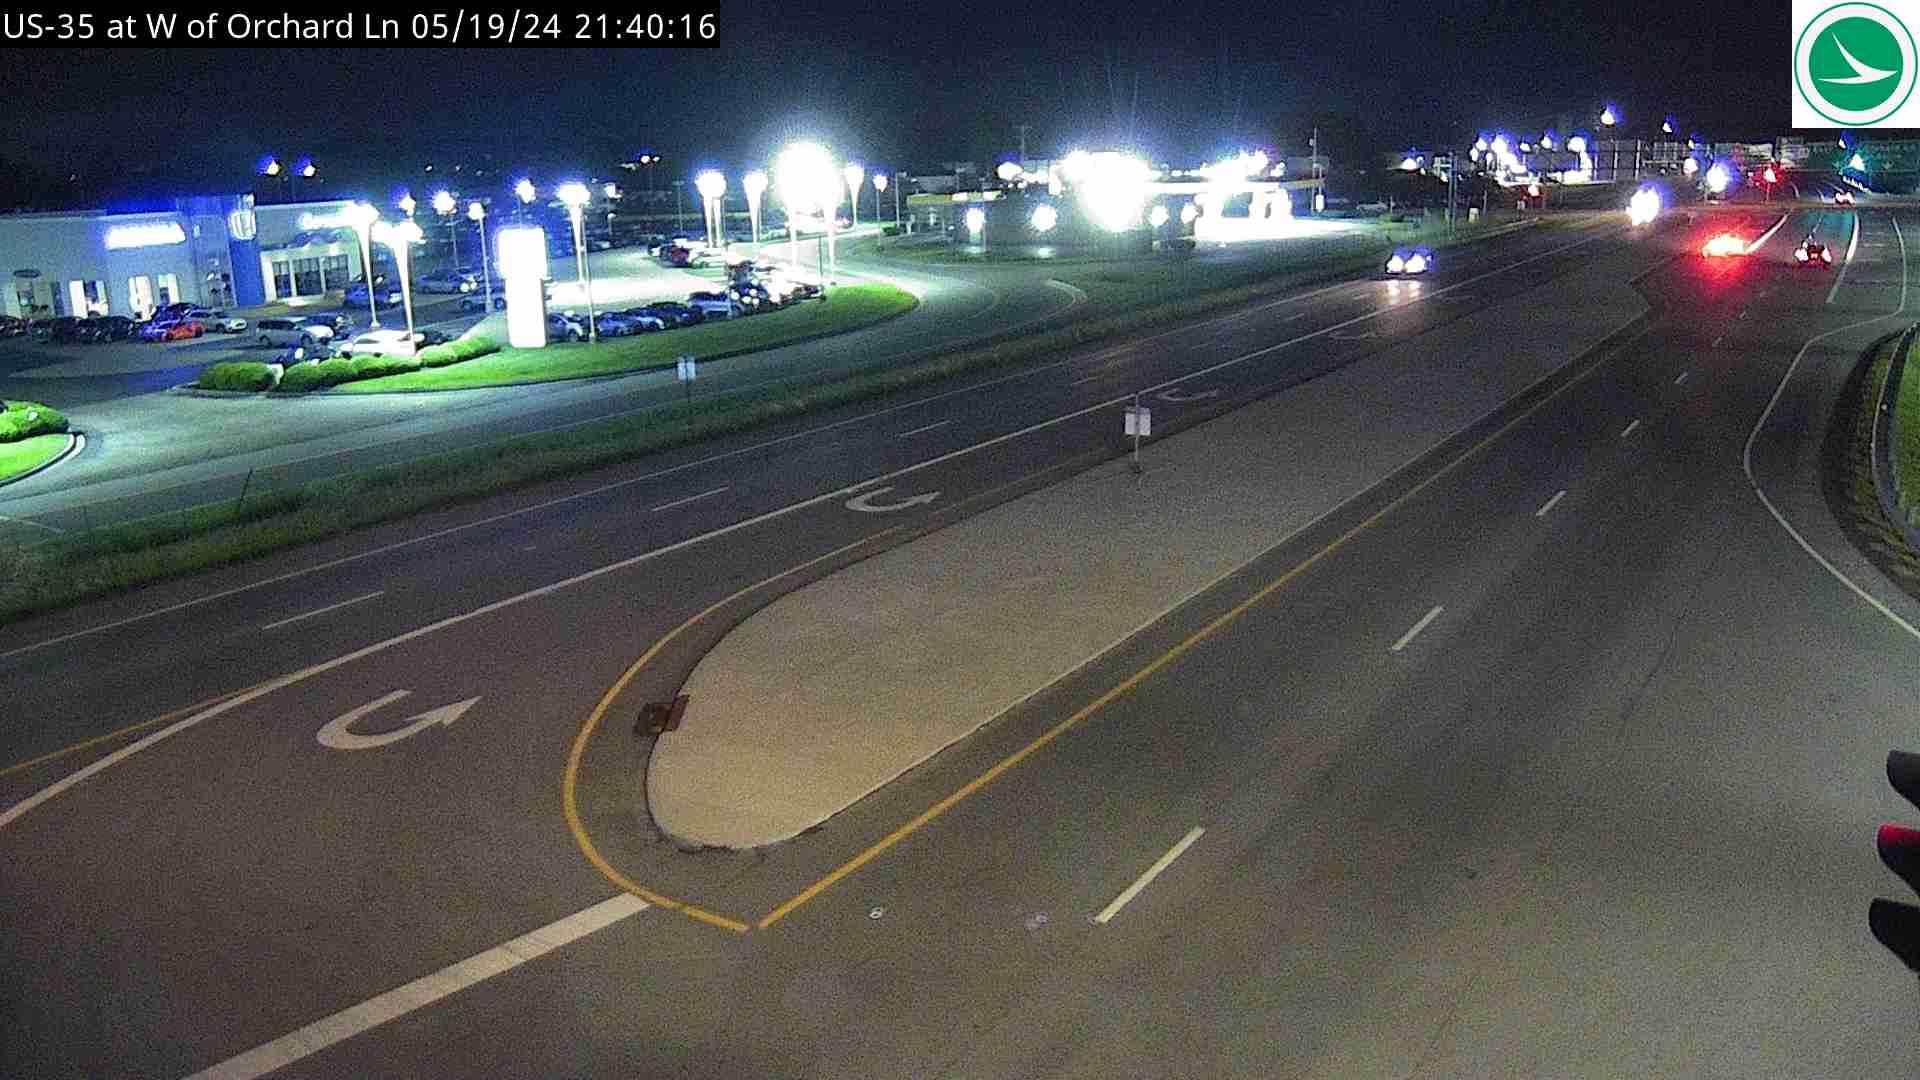 Traffic Cam Alpha: US-35 at West of Orchard Ln Player